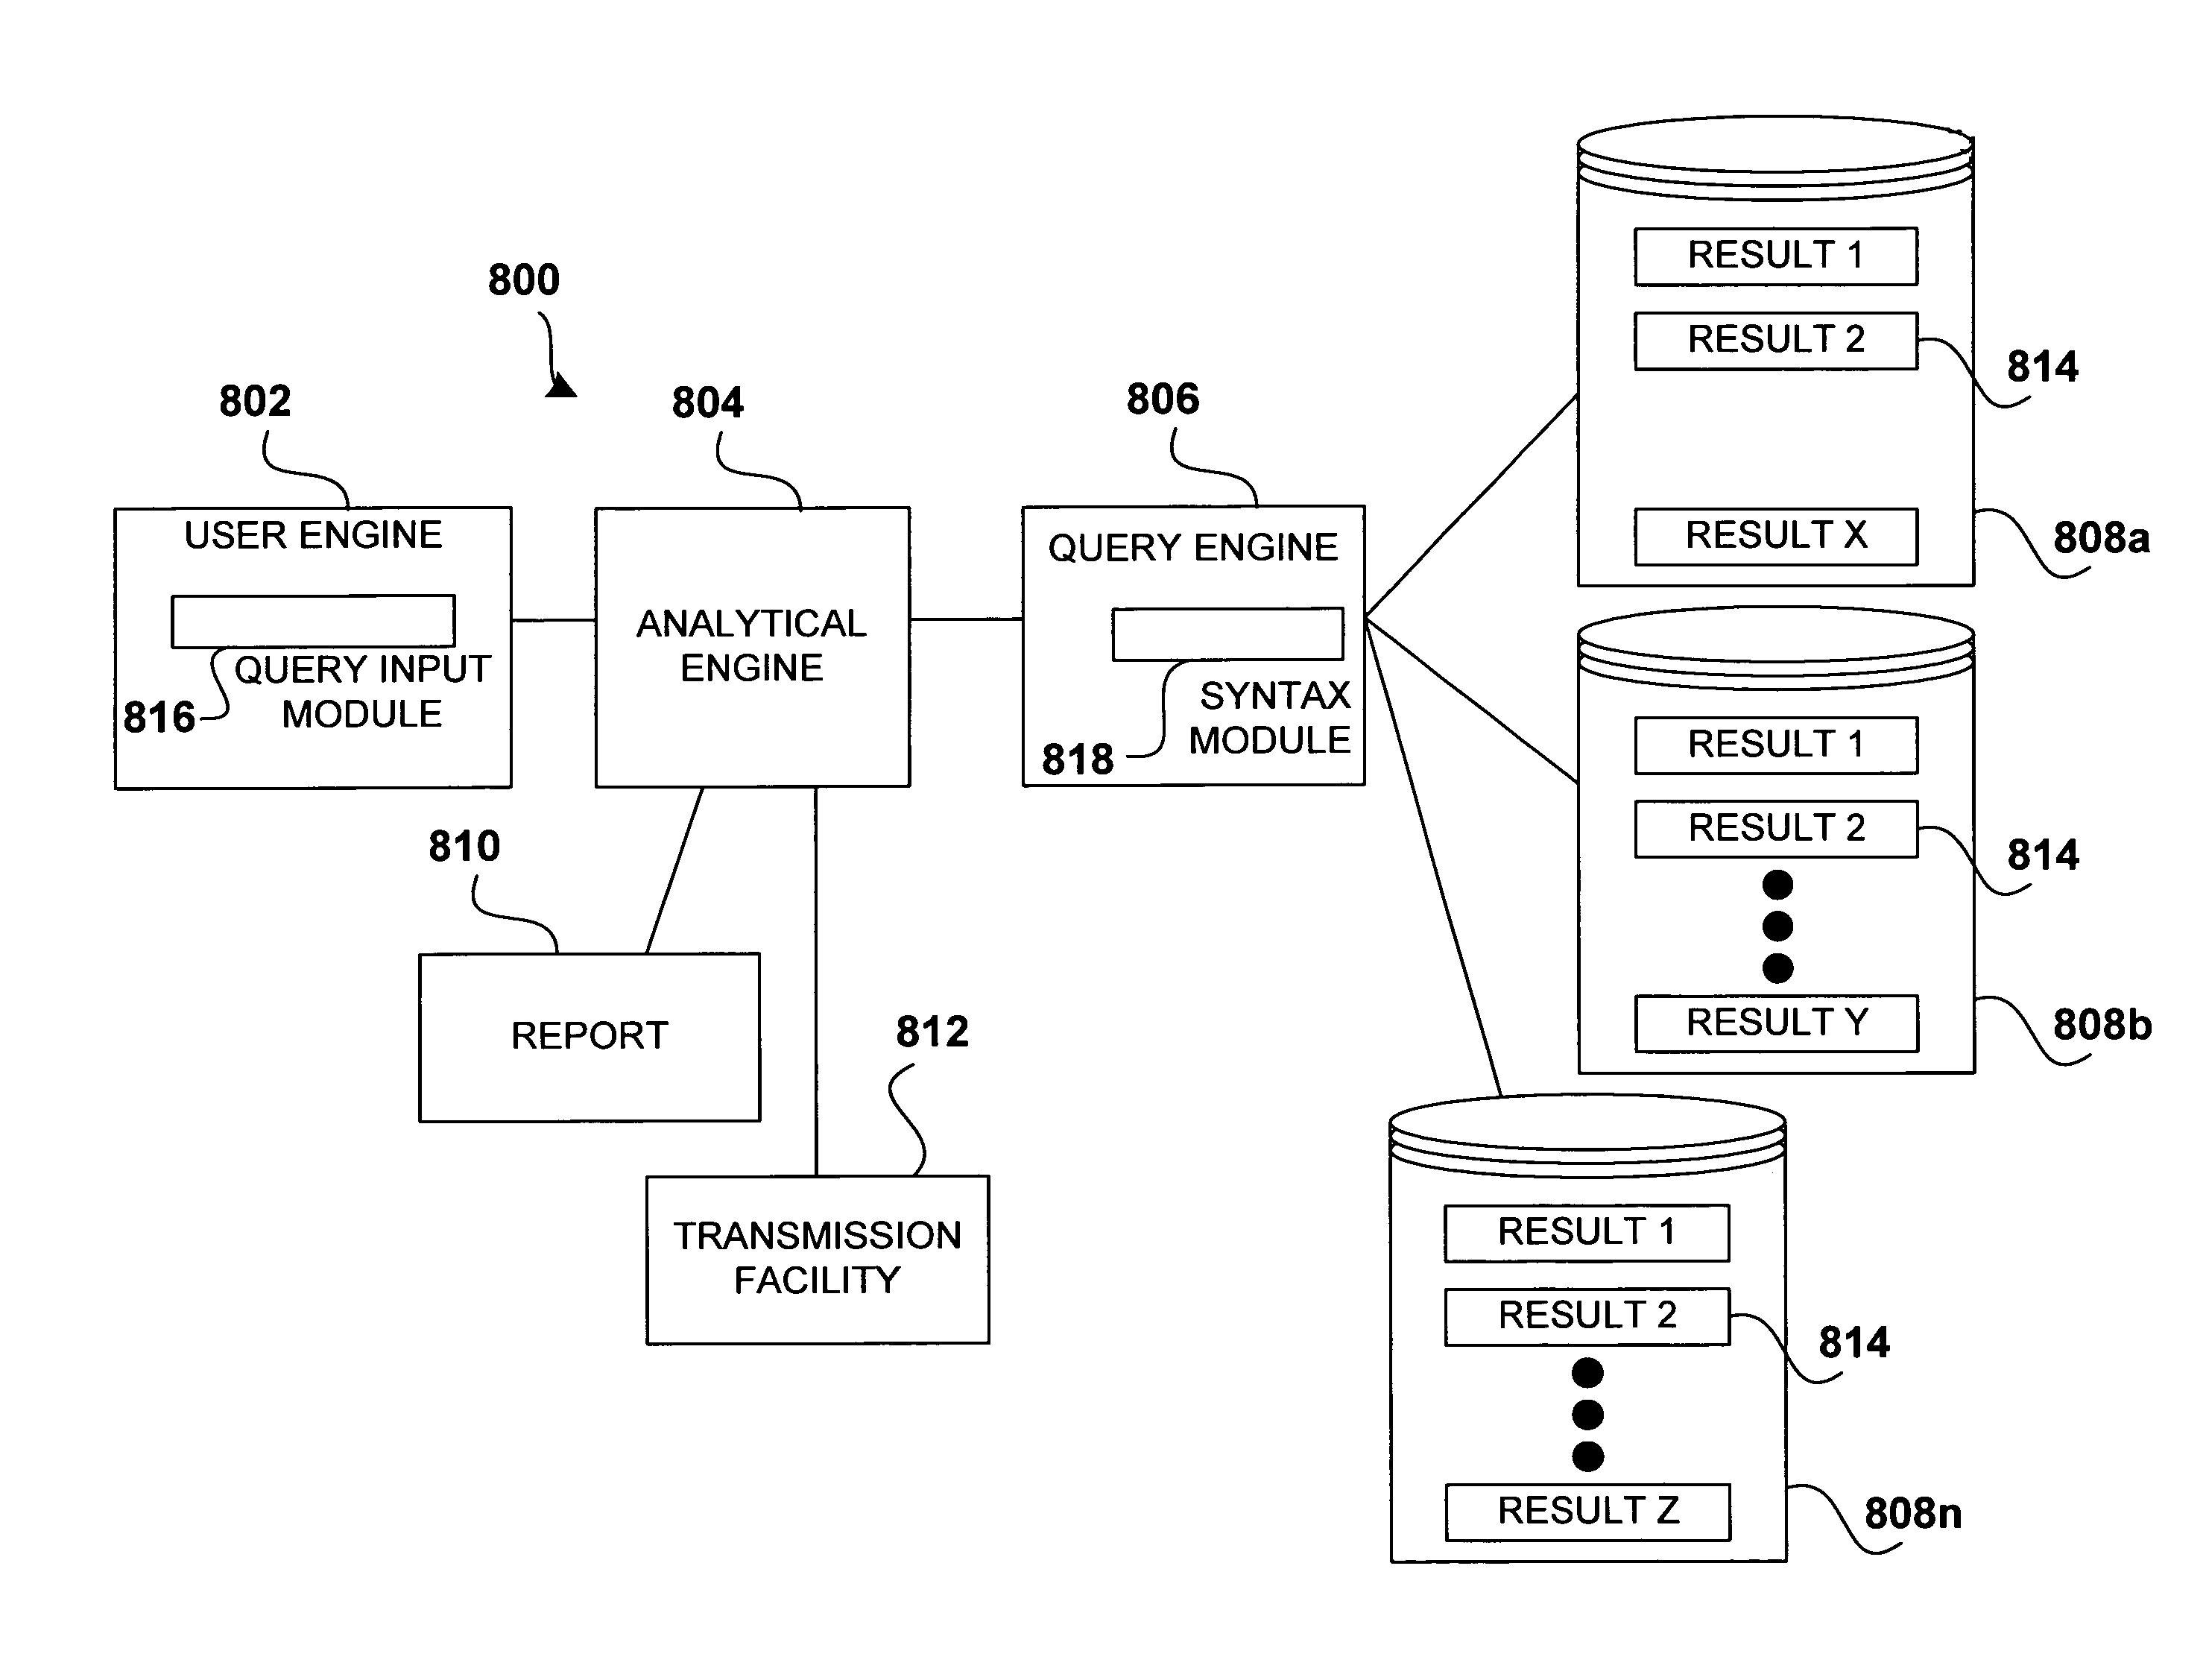 System and method for obtaining feedback from delivery of informational and transactional data